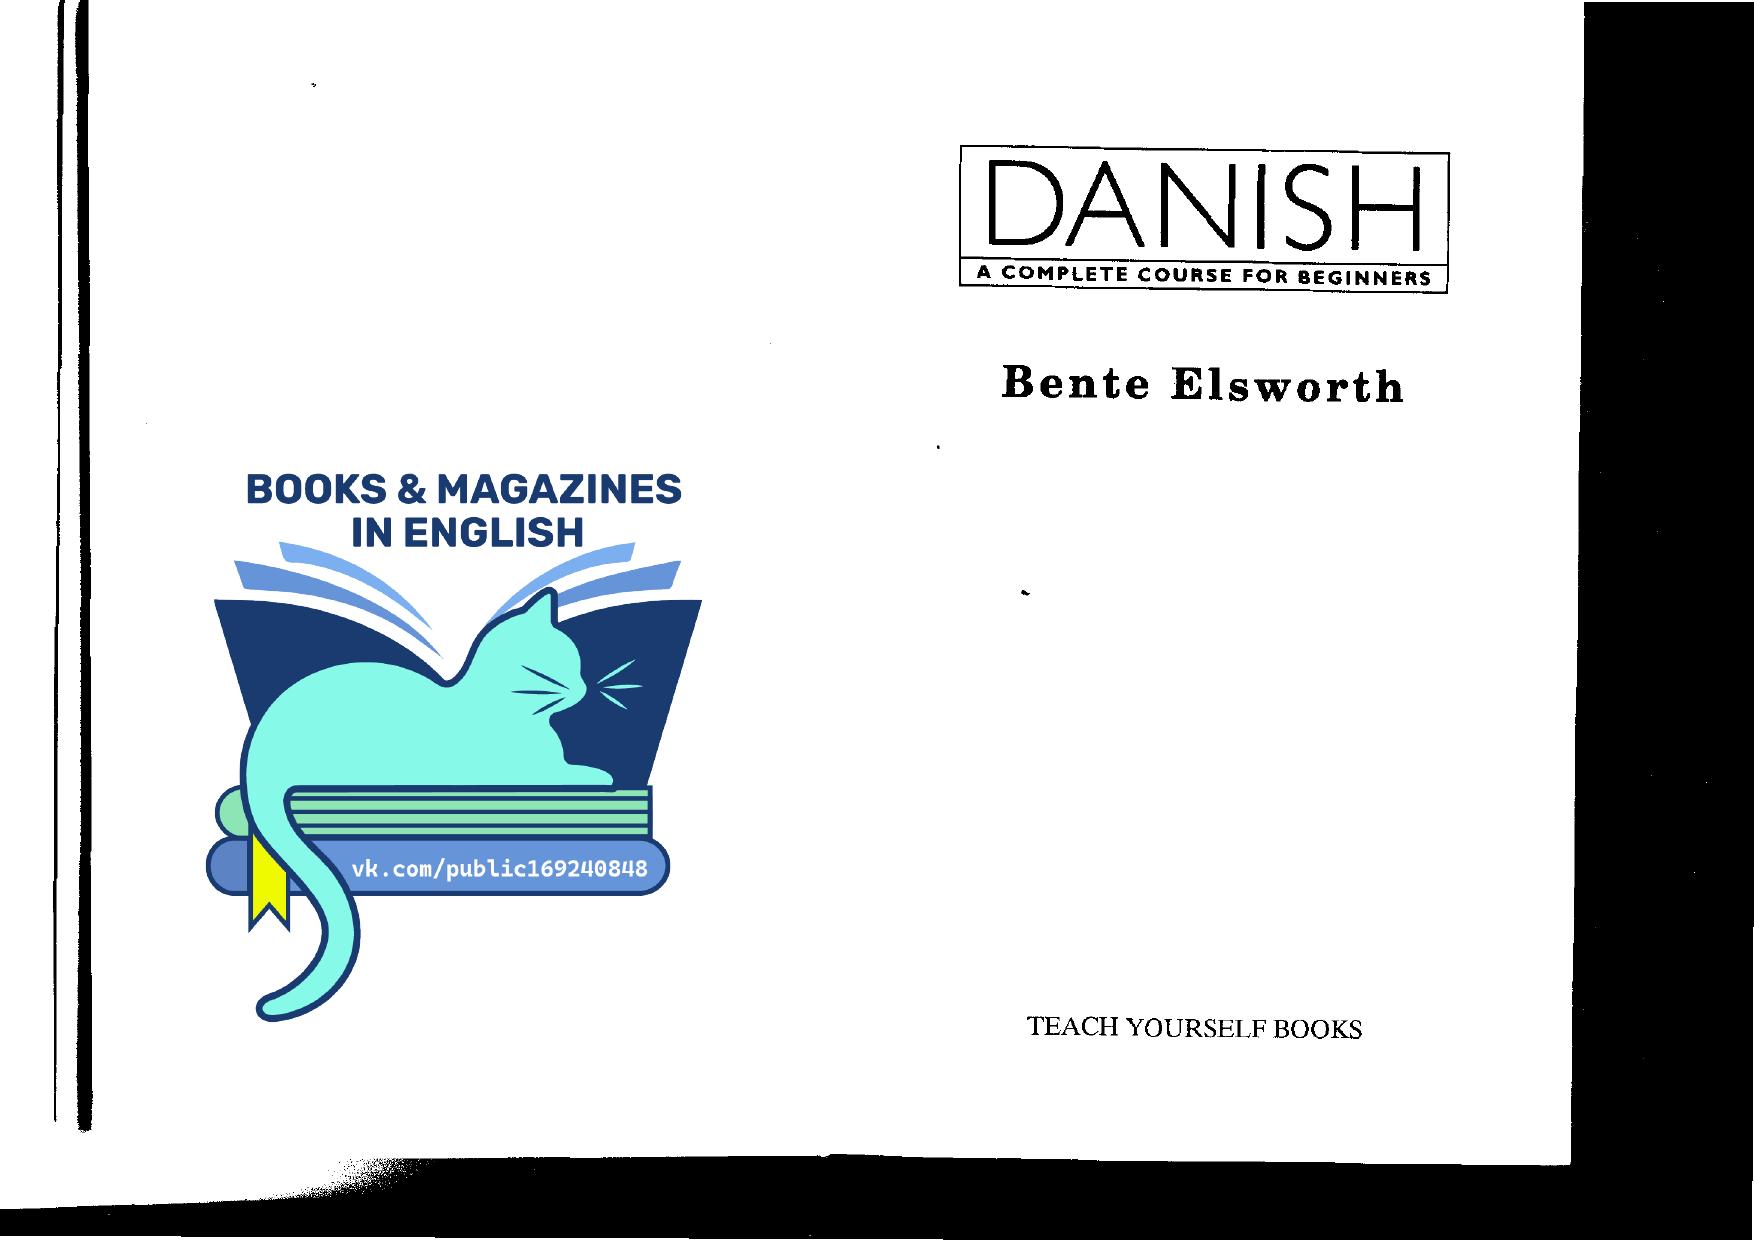 Teach Yourself Danish: A Complete Course for Beginners by Bente Elsworth